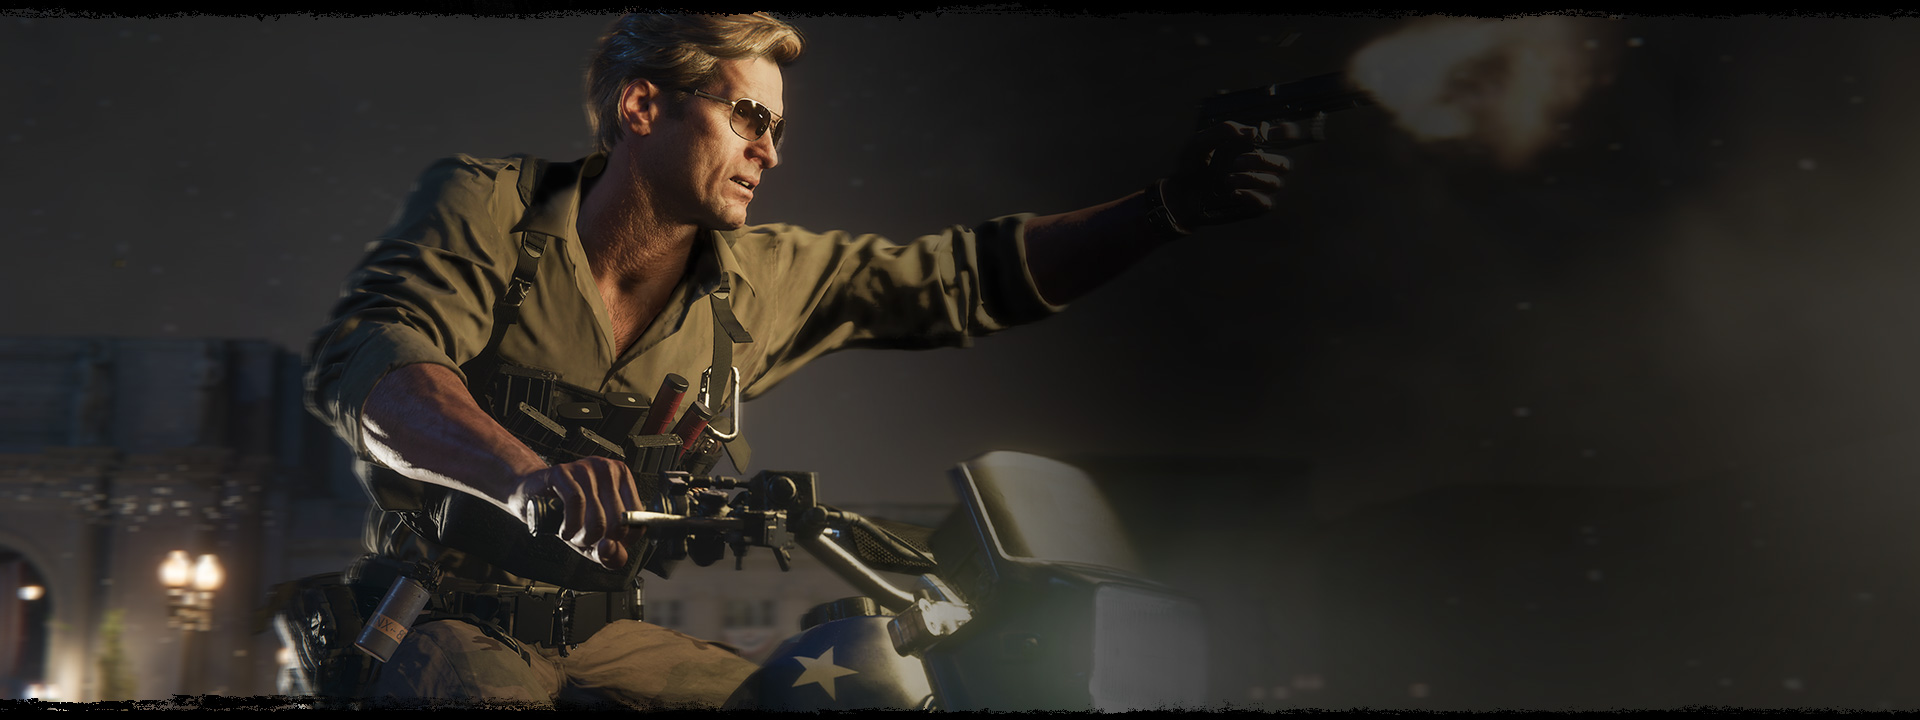 A character shooting a handgun while riding a motorcycle with an American flag pattern.